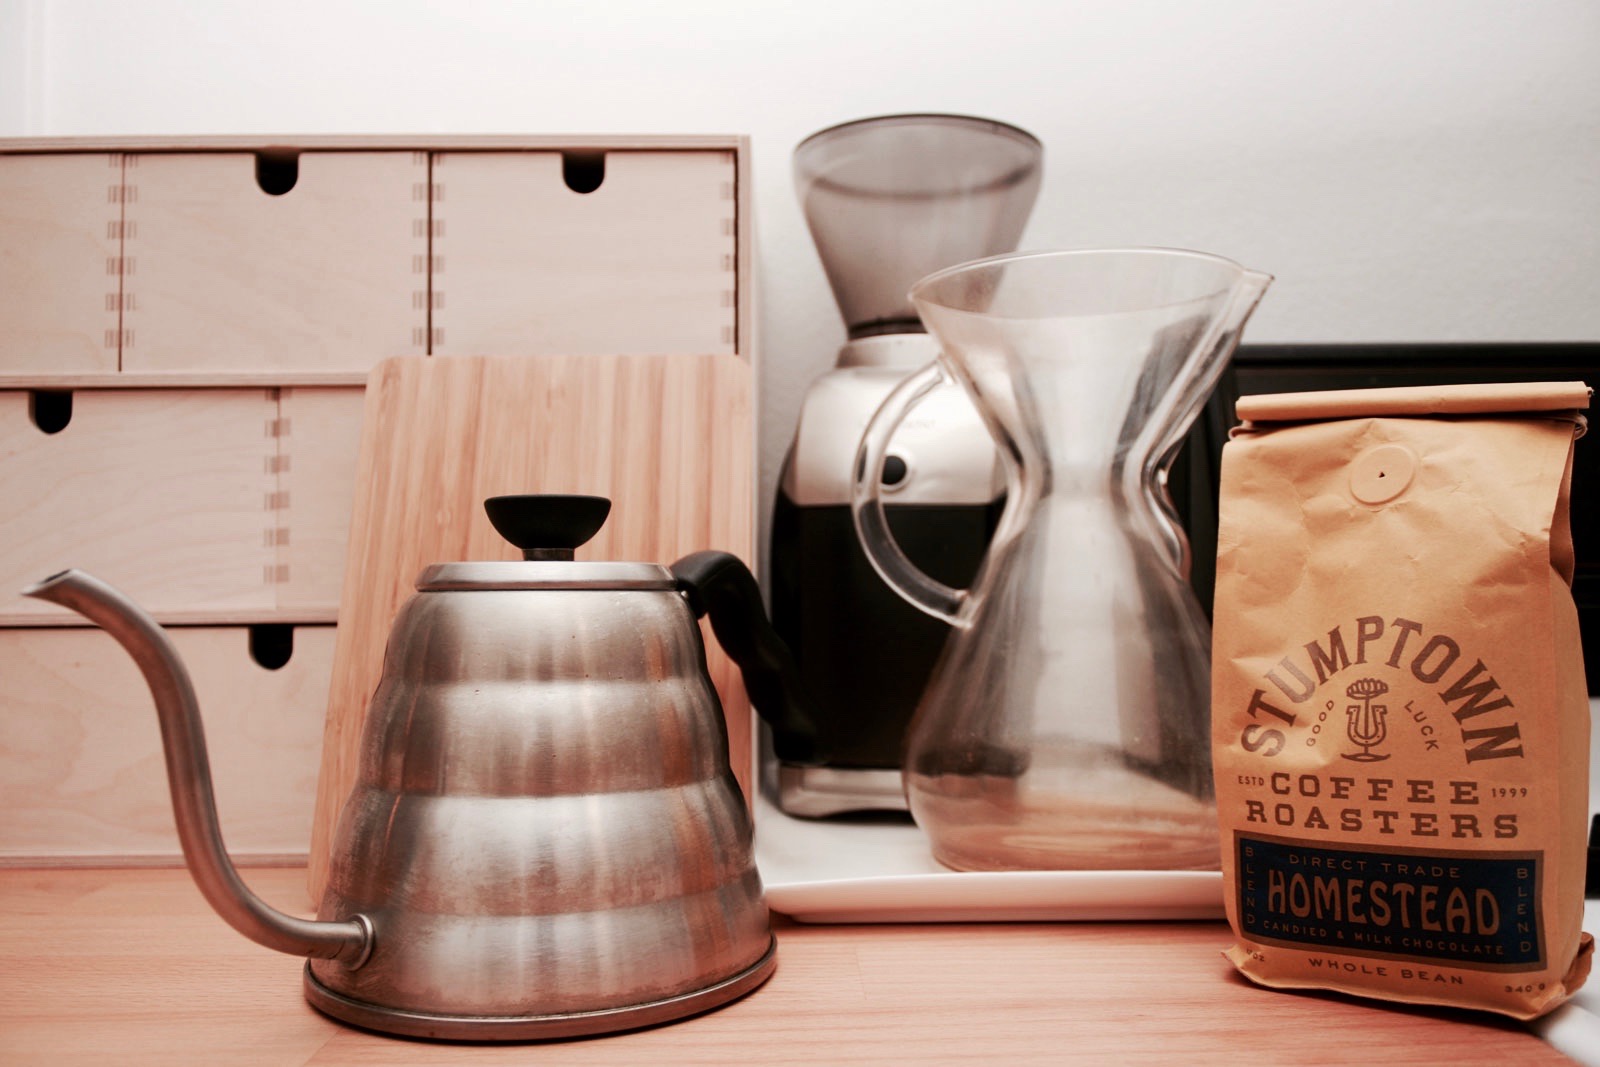 The setup for brewing coffee at home